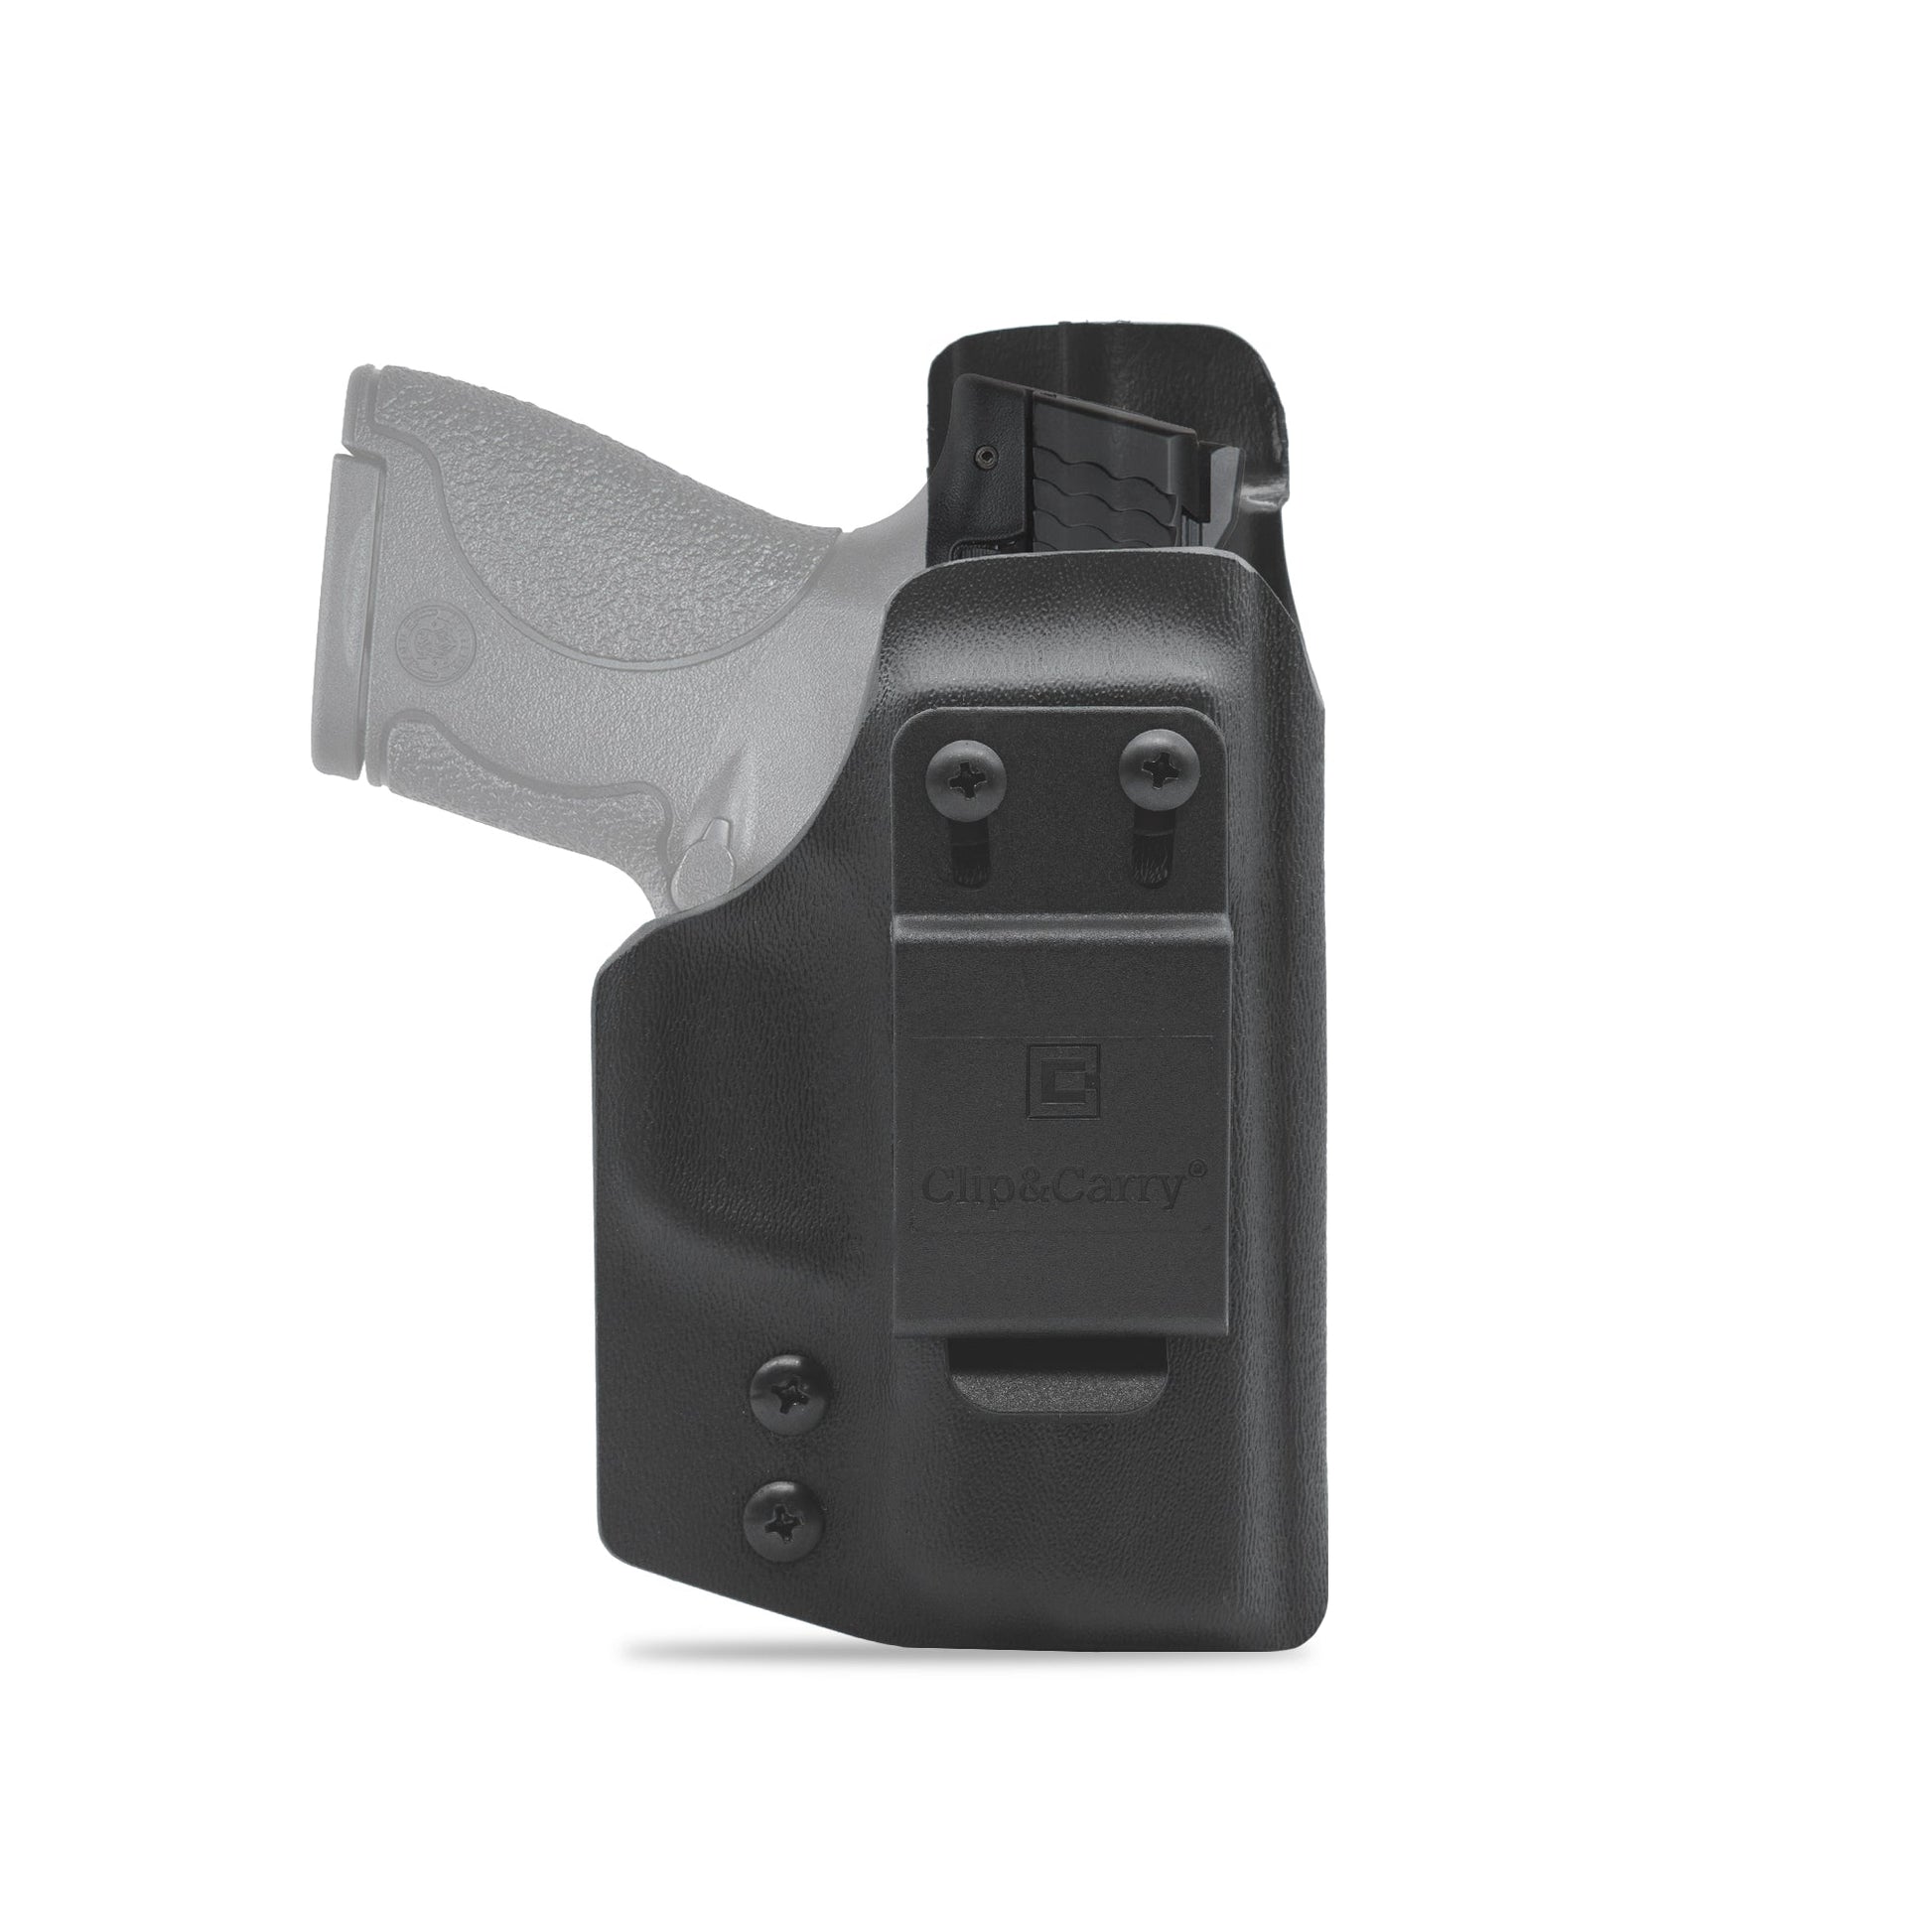 IWB Holster for the Smith & Wesson Shield, Shield+, Shield M2.0 9mm/.40 Clip & Carry